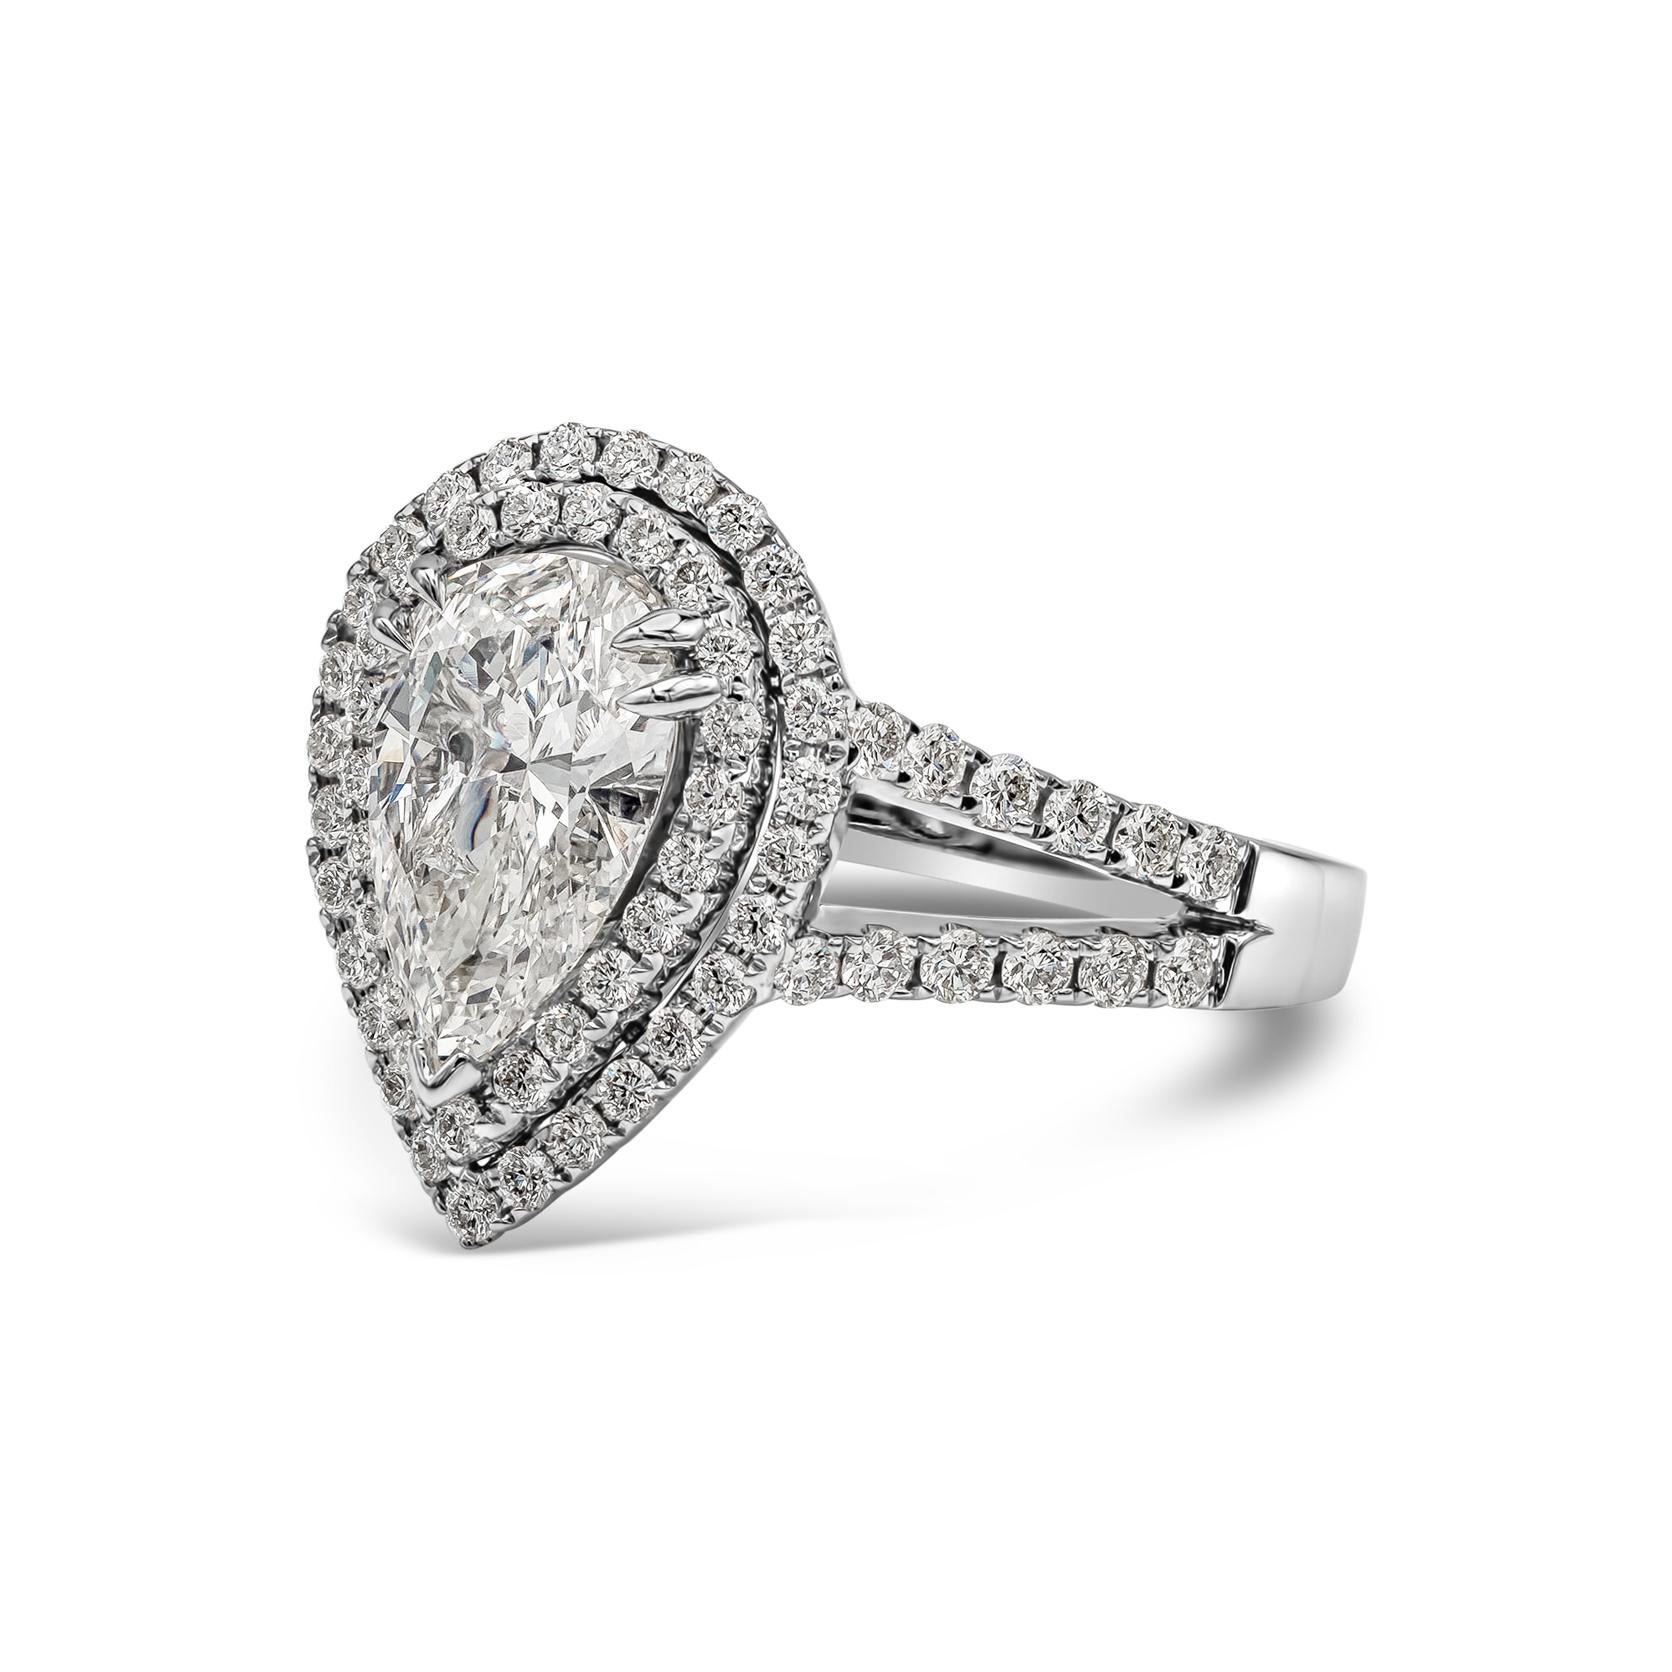 Showcasing a 1.53 carats pear shape diamond certified by GIA as H color, VS1 in clarity; surrounded by two rows of round brilliant diamonds in an accented split-shank setting made in 18k white gold. Accent diamonds weigh 0.71 carats total. Size 6.75